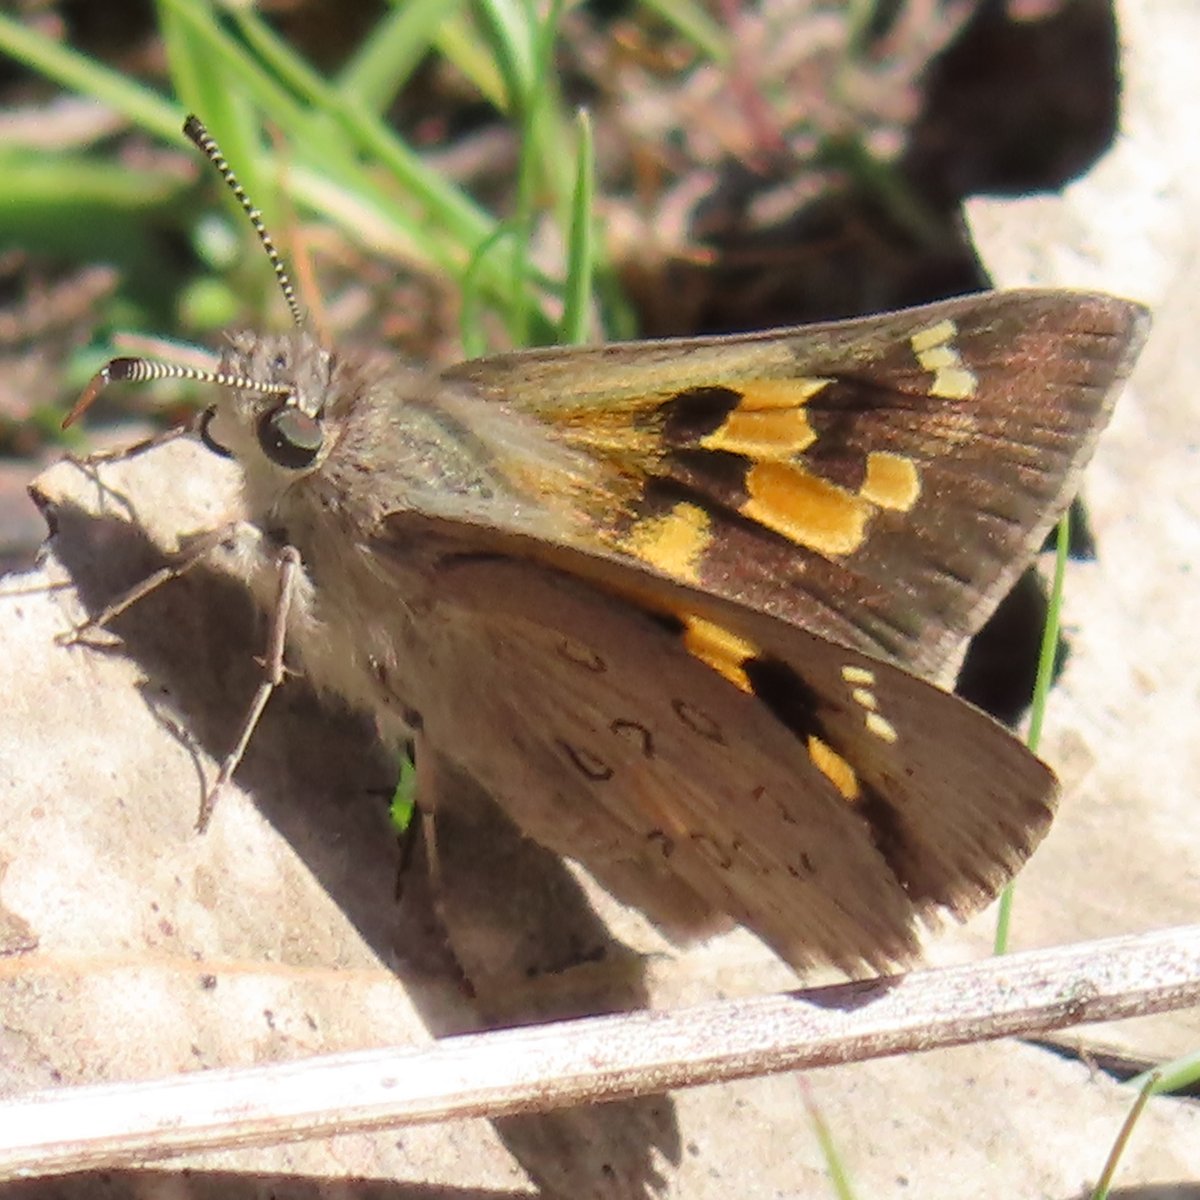 A joy to see the first Heath Ochre #butterfly of the season in Mount Taylor Nature Reserve, a stronghold for this tiny skipper, with an abundance of eucalypt woodland containing its preferred larval food plant the Wattle Mat-rush or Lomandra filiformis @NatureMapr @CitSciOZ